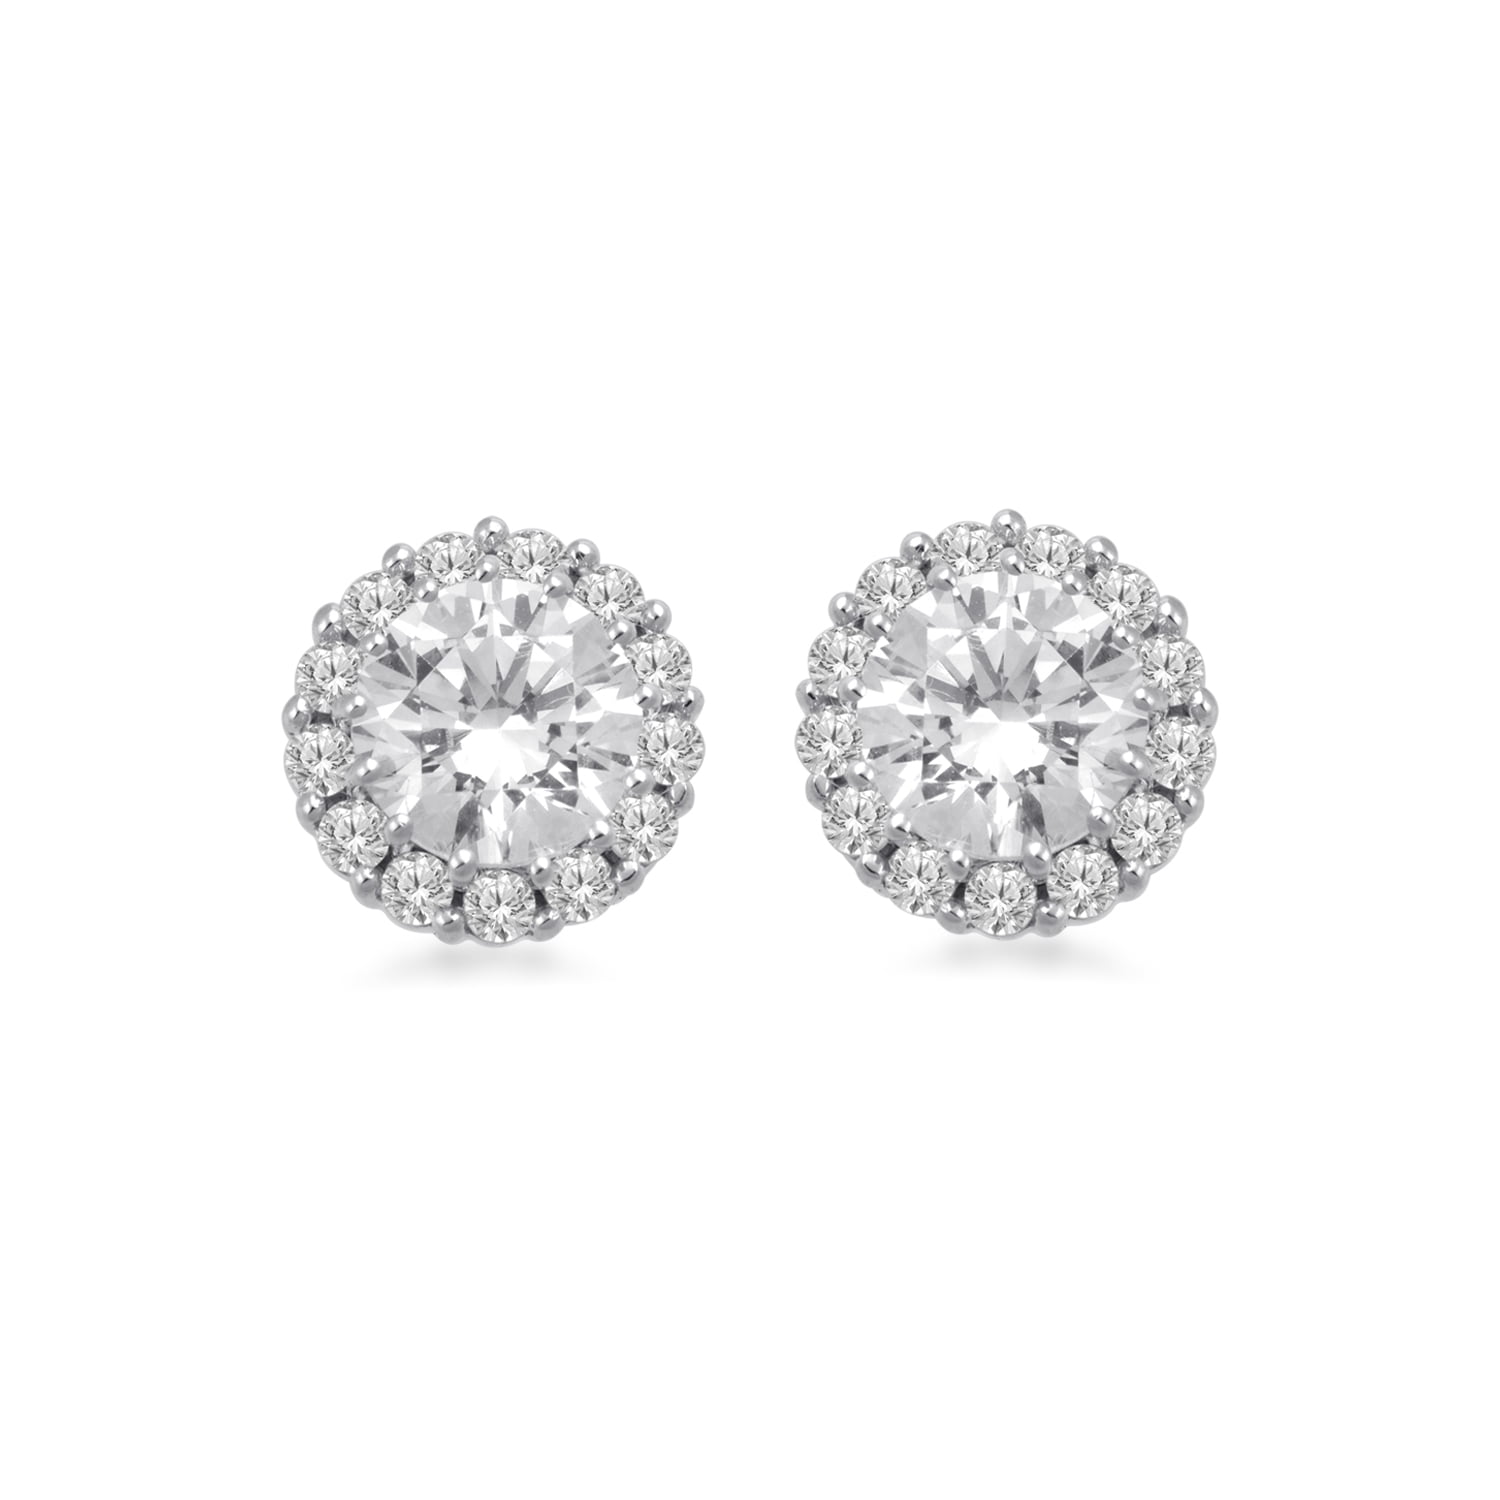 Details about   CZ White Howlite Gemstone Jewelry Gold Plated 925 Sterling Silver Stud Earrings